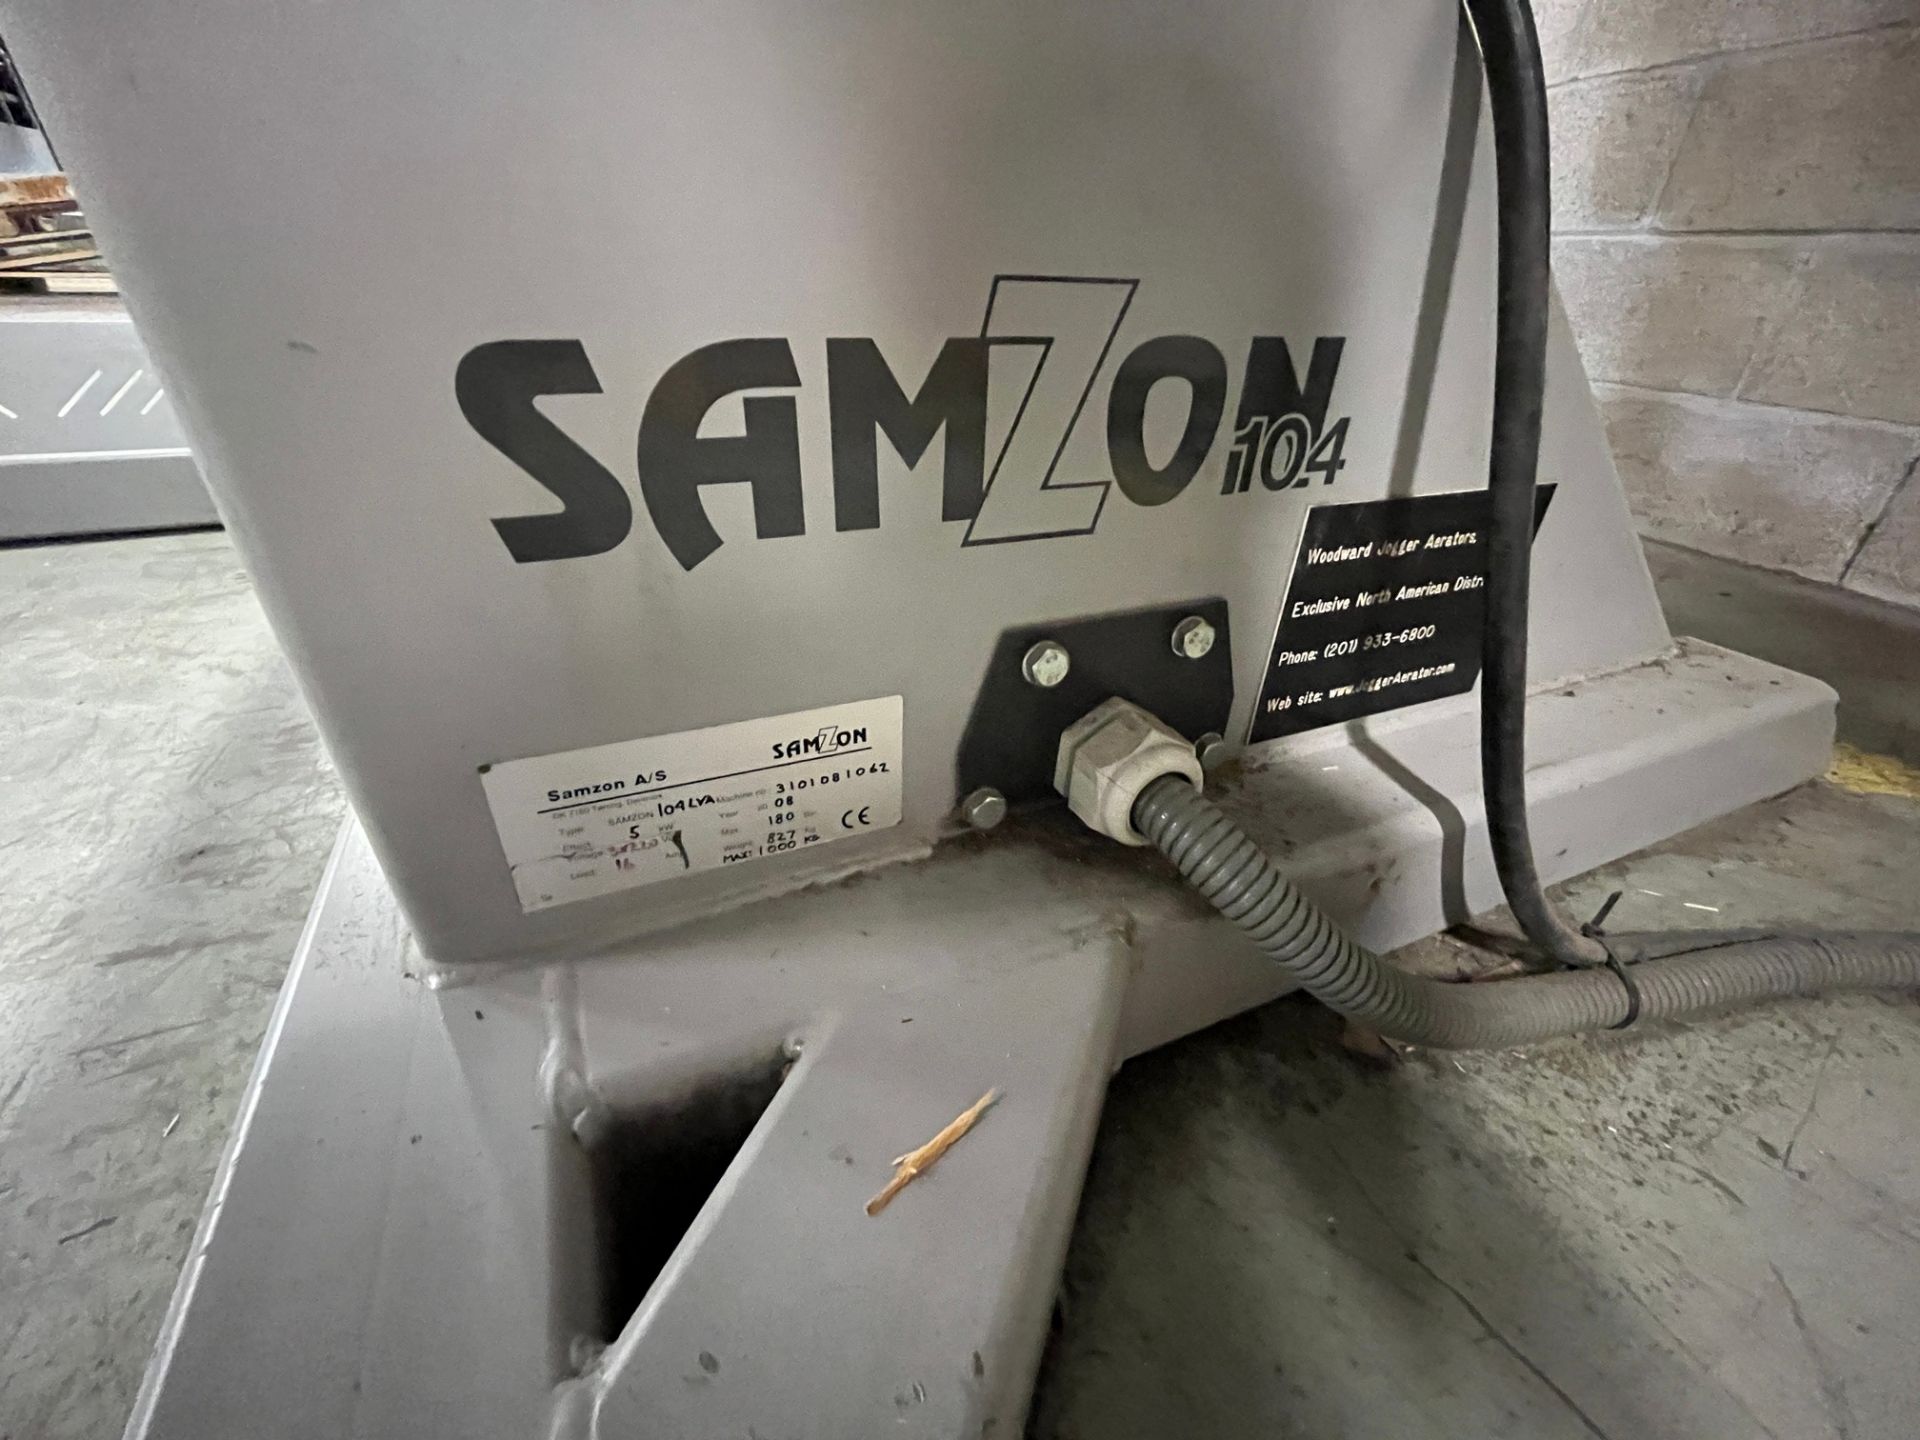 SAMZON 104 PAPER TURNING MACHINE W/ CONTROL PANEL AND VACUUM PUMP (RIGGING FEE $250 USD) - Image 2 of 5